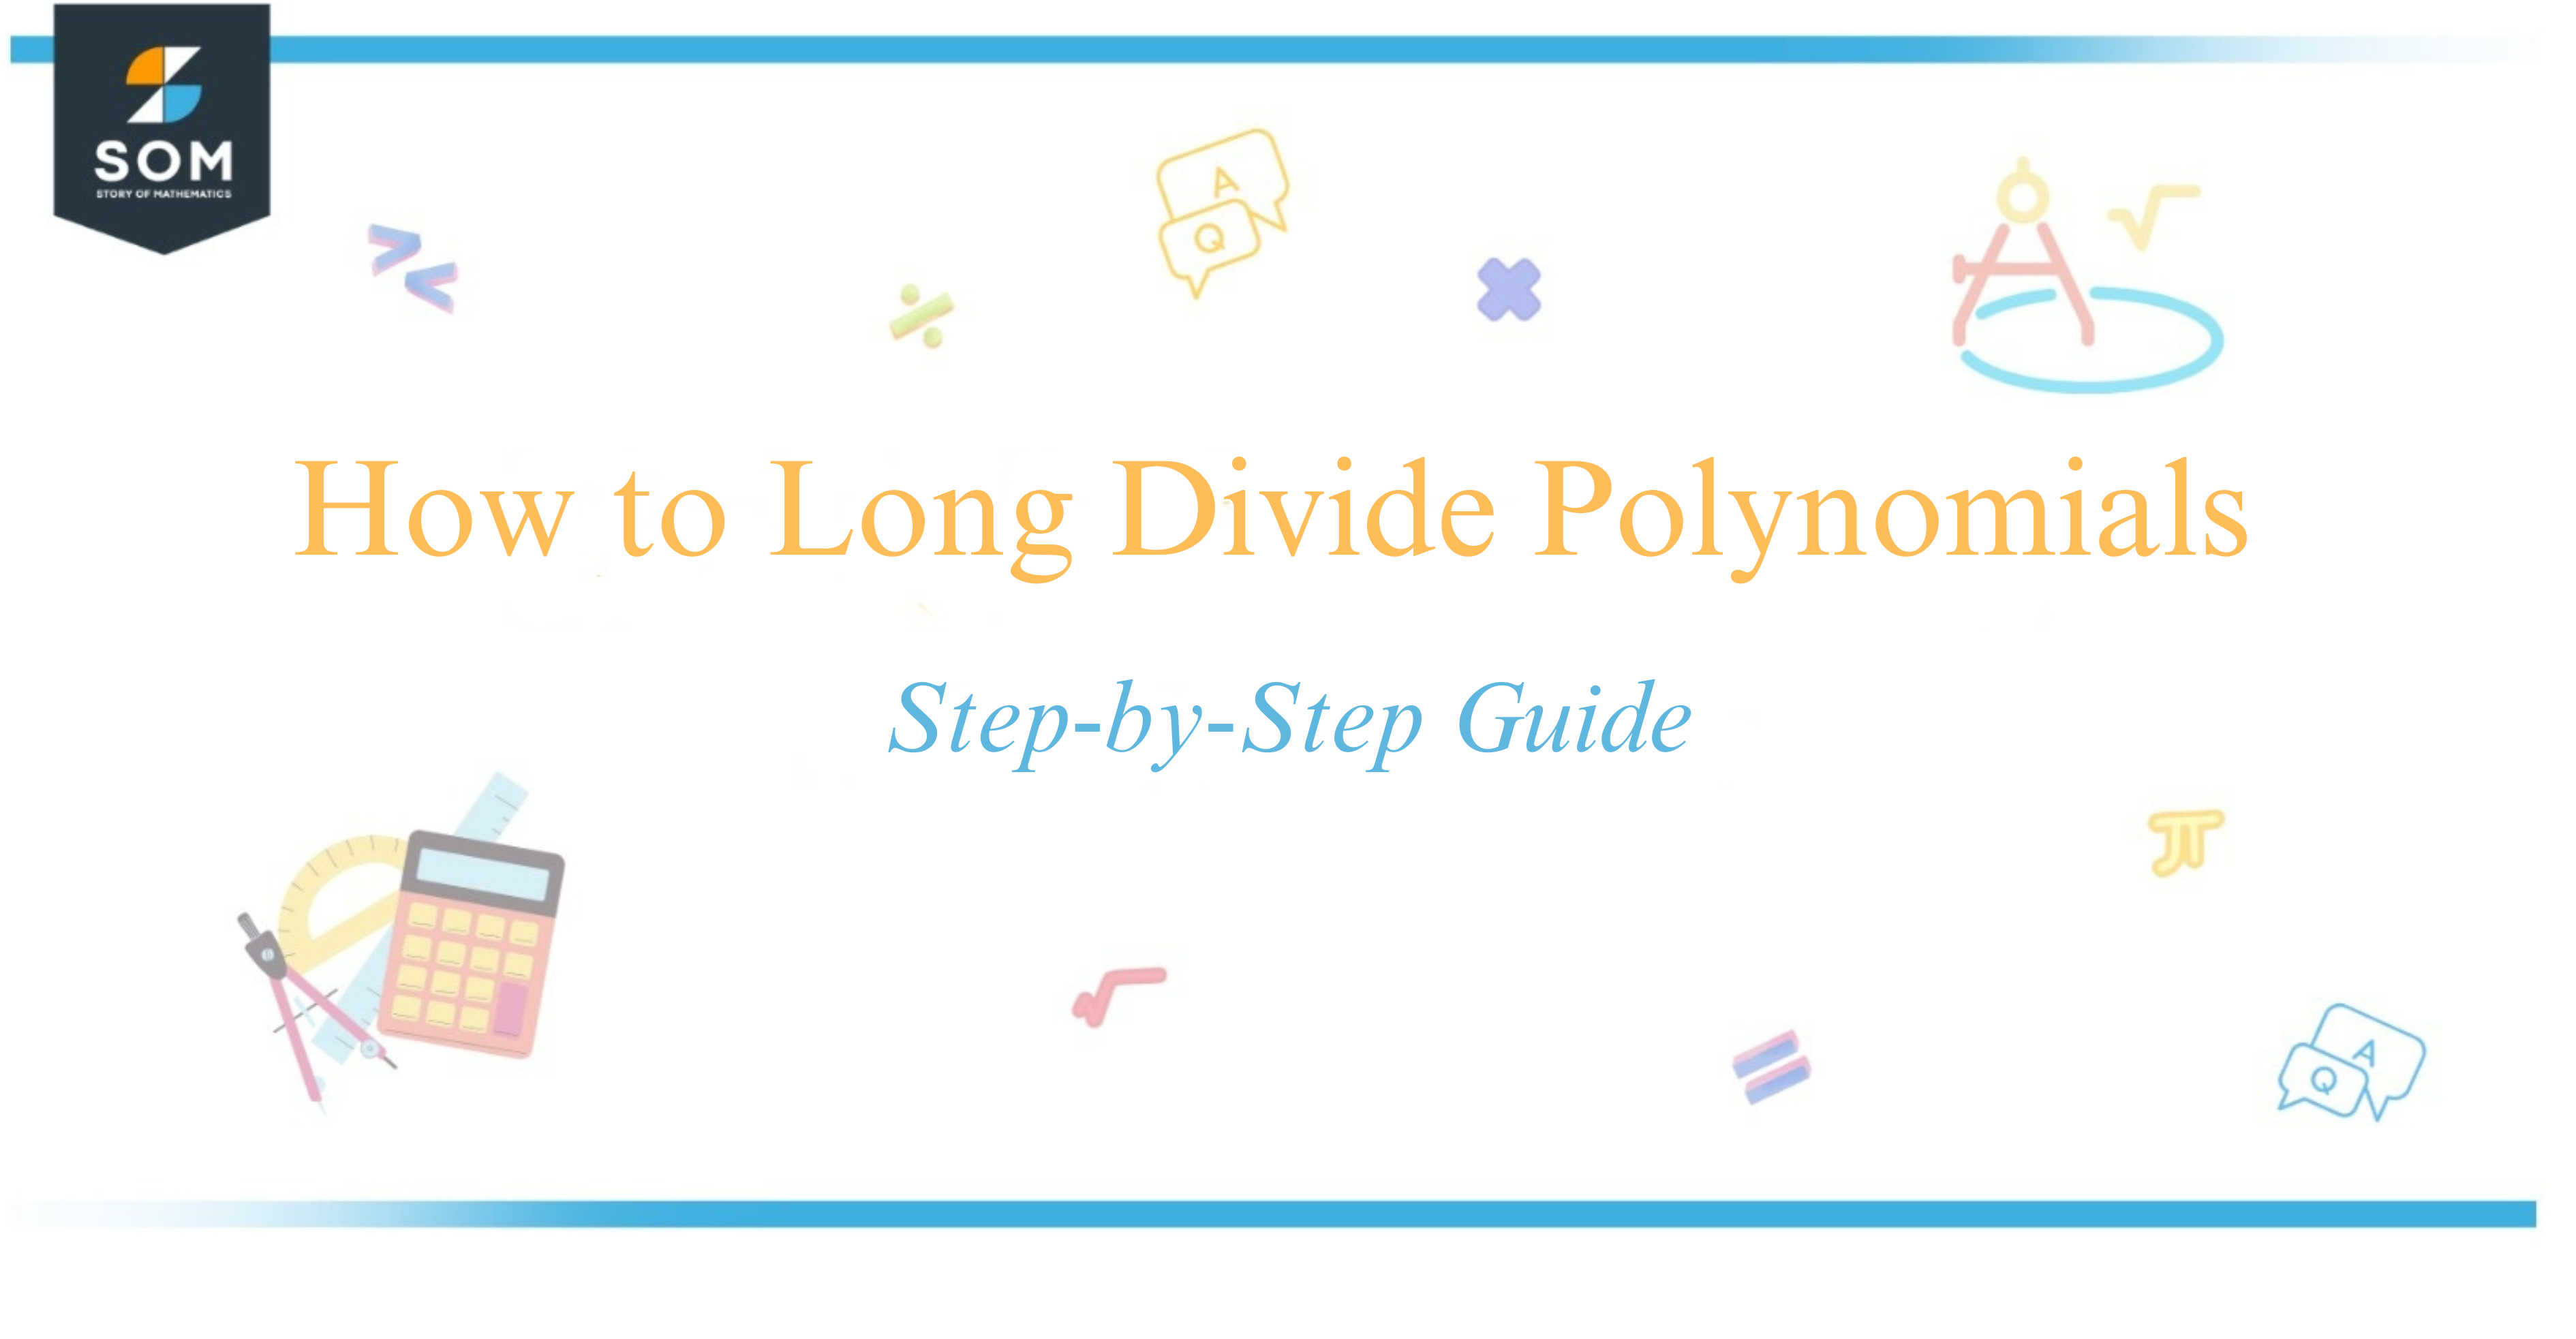 How to Long Divide Polynomials Step-by-Step Guide